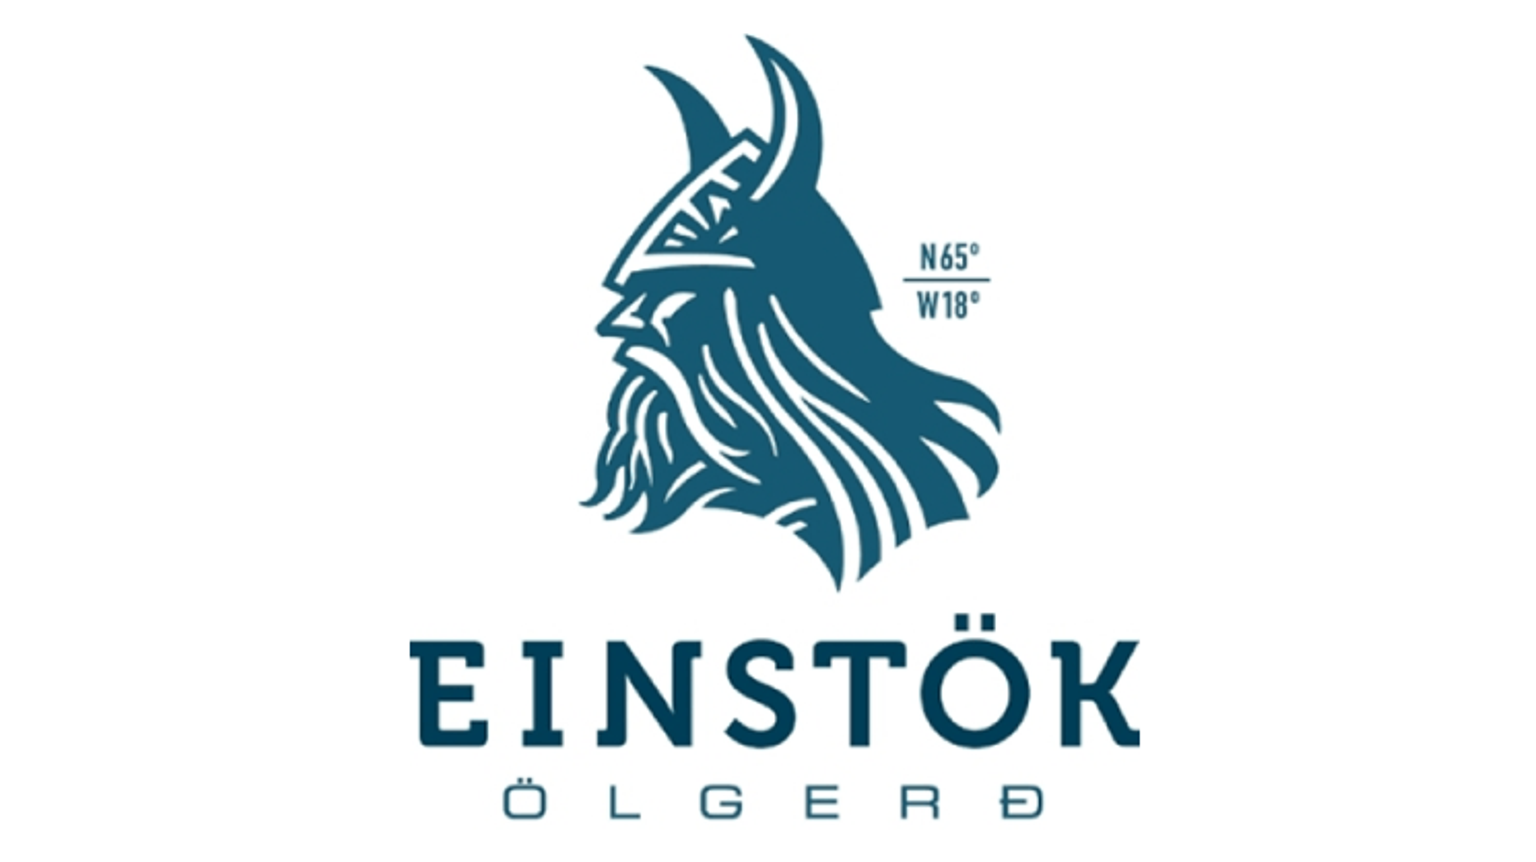 thumbnail for blog article named: Einstok Olgerd - Craft brewing on top of the world!